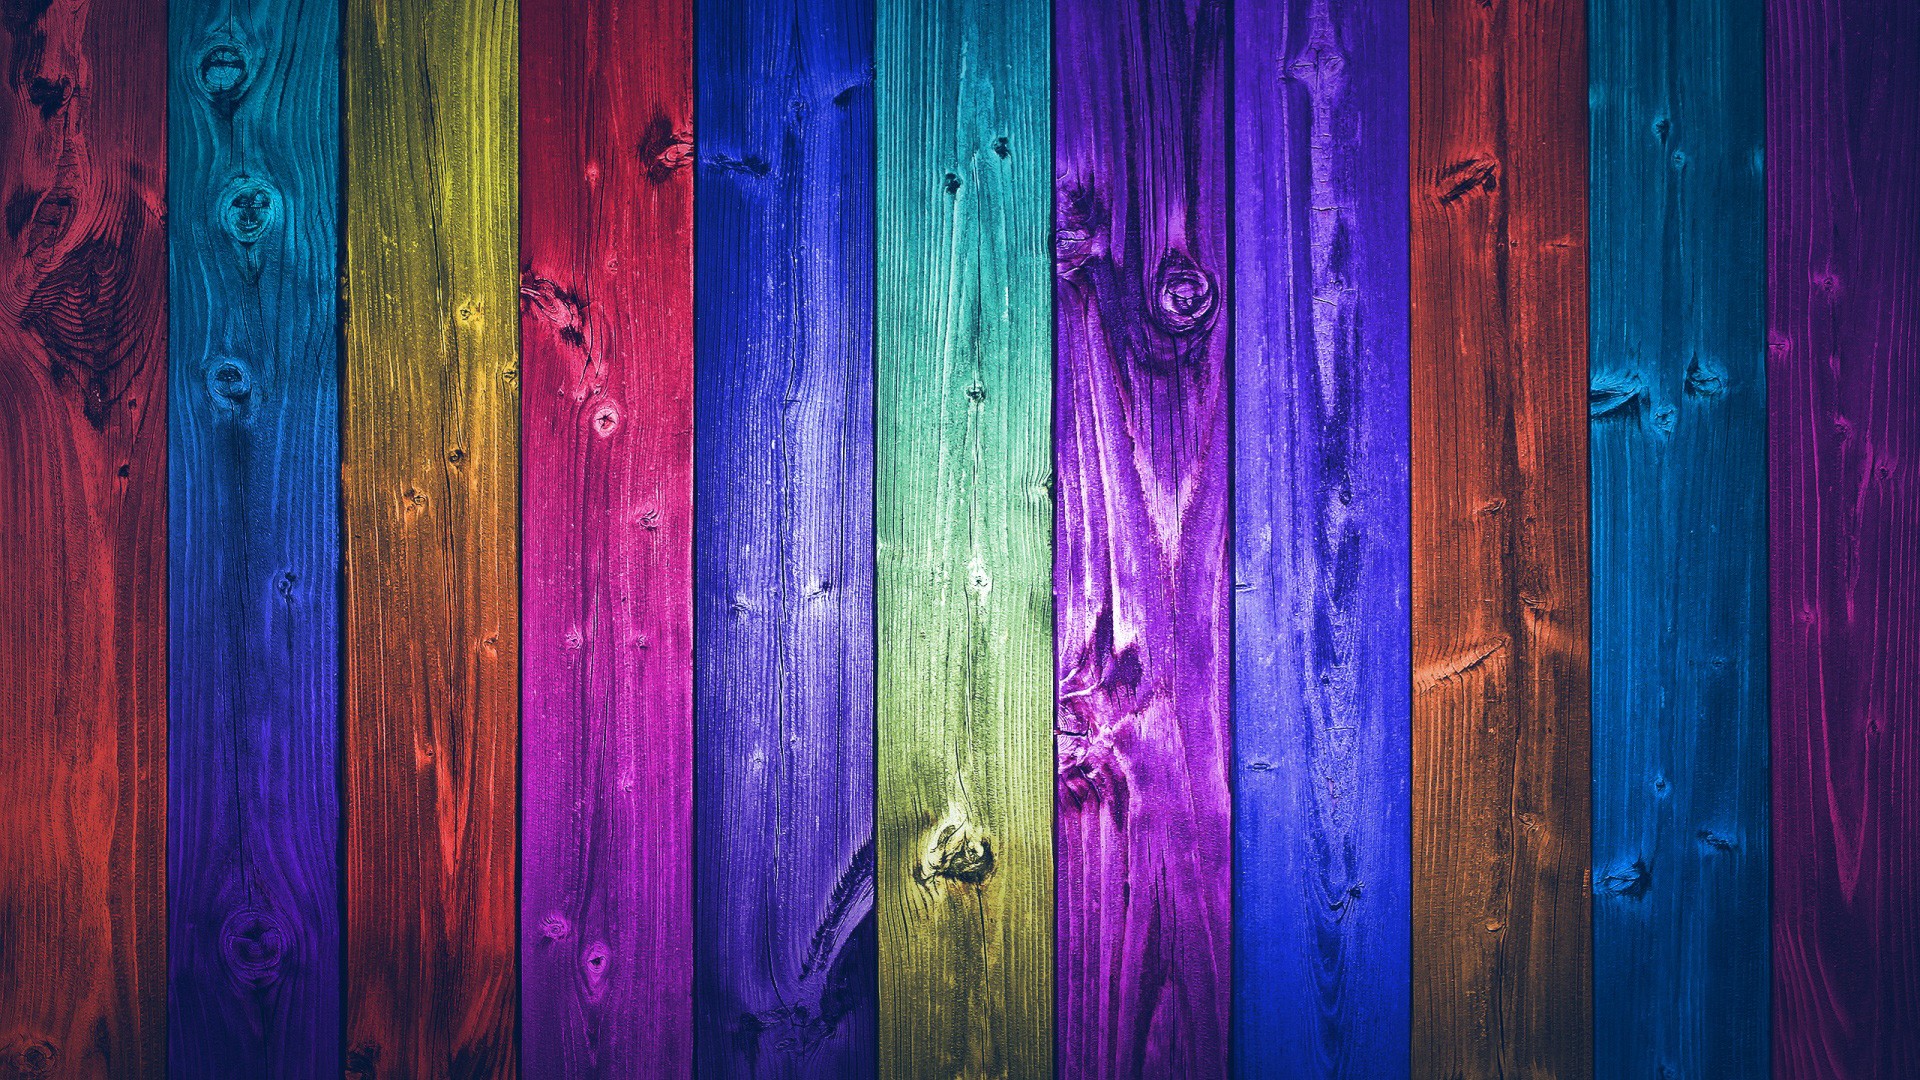 Download Colorful Wooden Plates Wallpaper Wallpapers 1920x1080